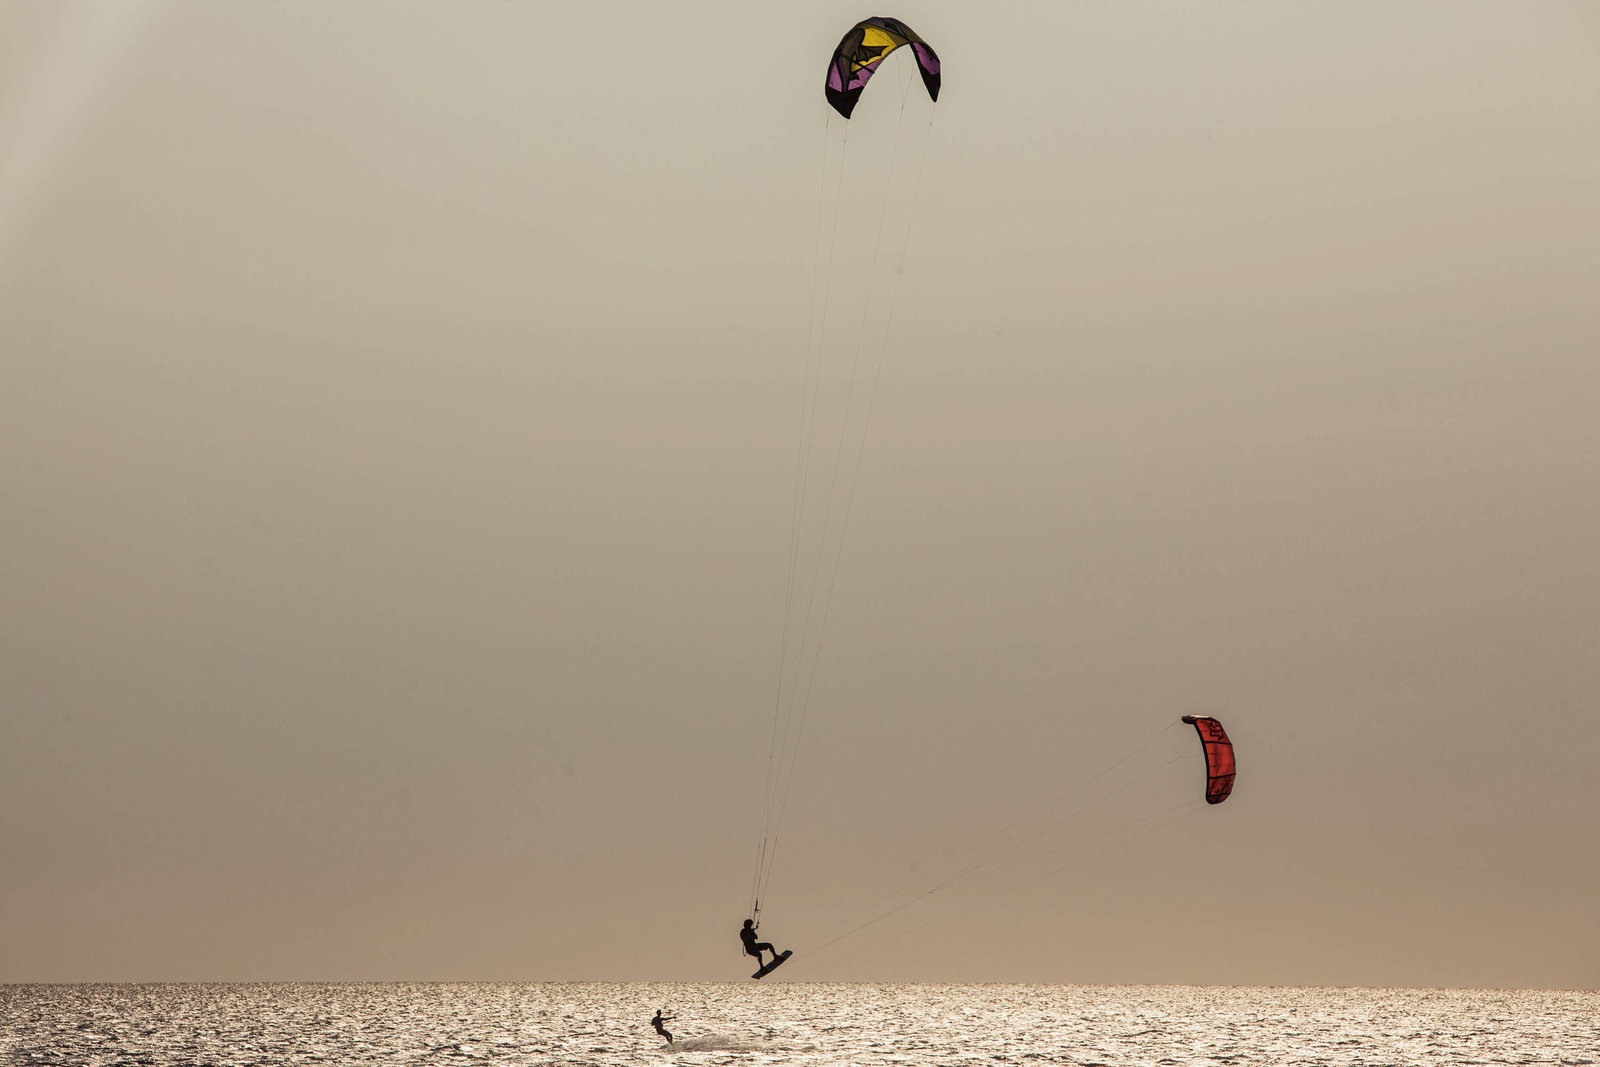 Kite-surf-sport-jump-bay-outer-banks-nc-kate-timbers-photography-1633